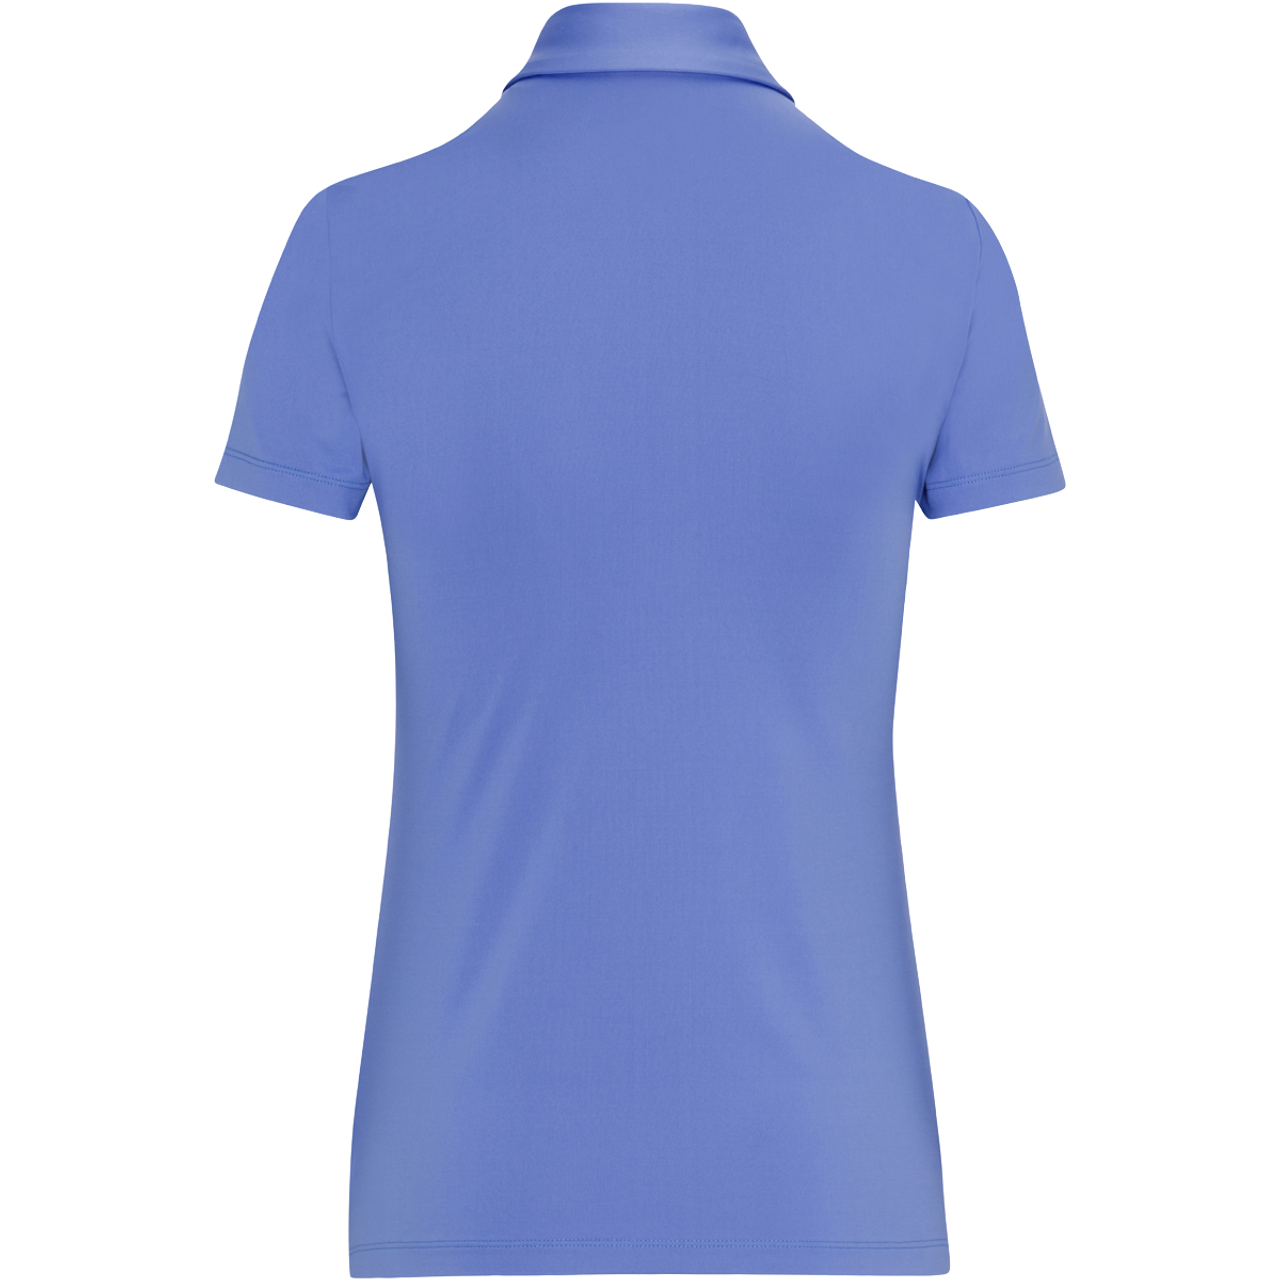 Women's Player Jersey Performance Polo - Dunning